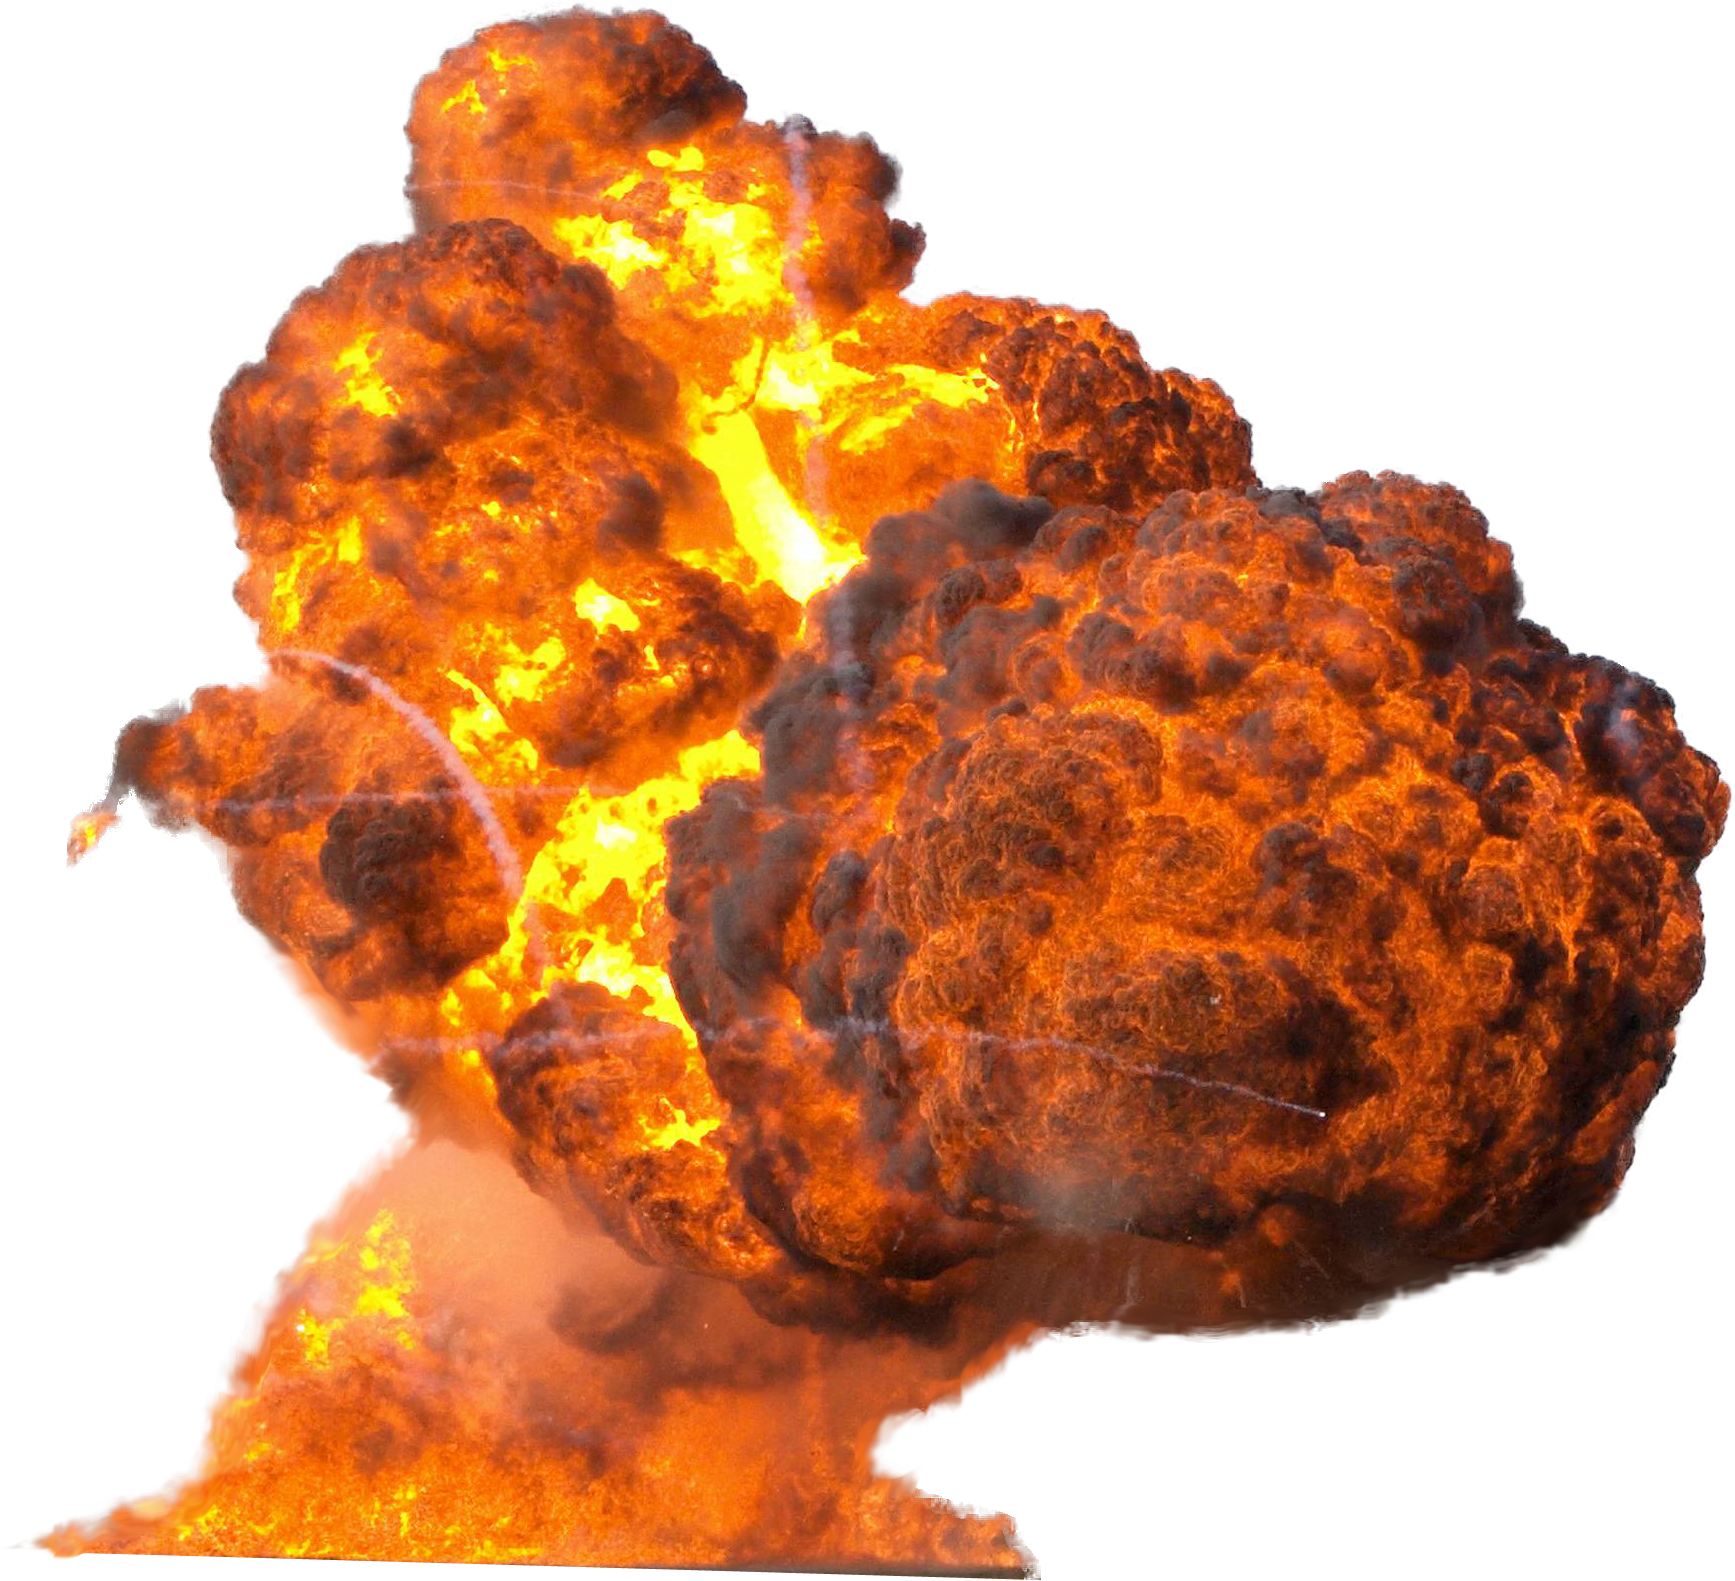 Big Explosion With Fire And Smoke Png Image - Explosion Transparent (3072x2044), Png Download